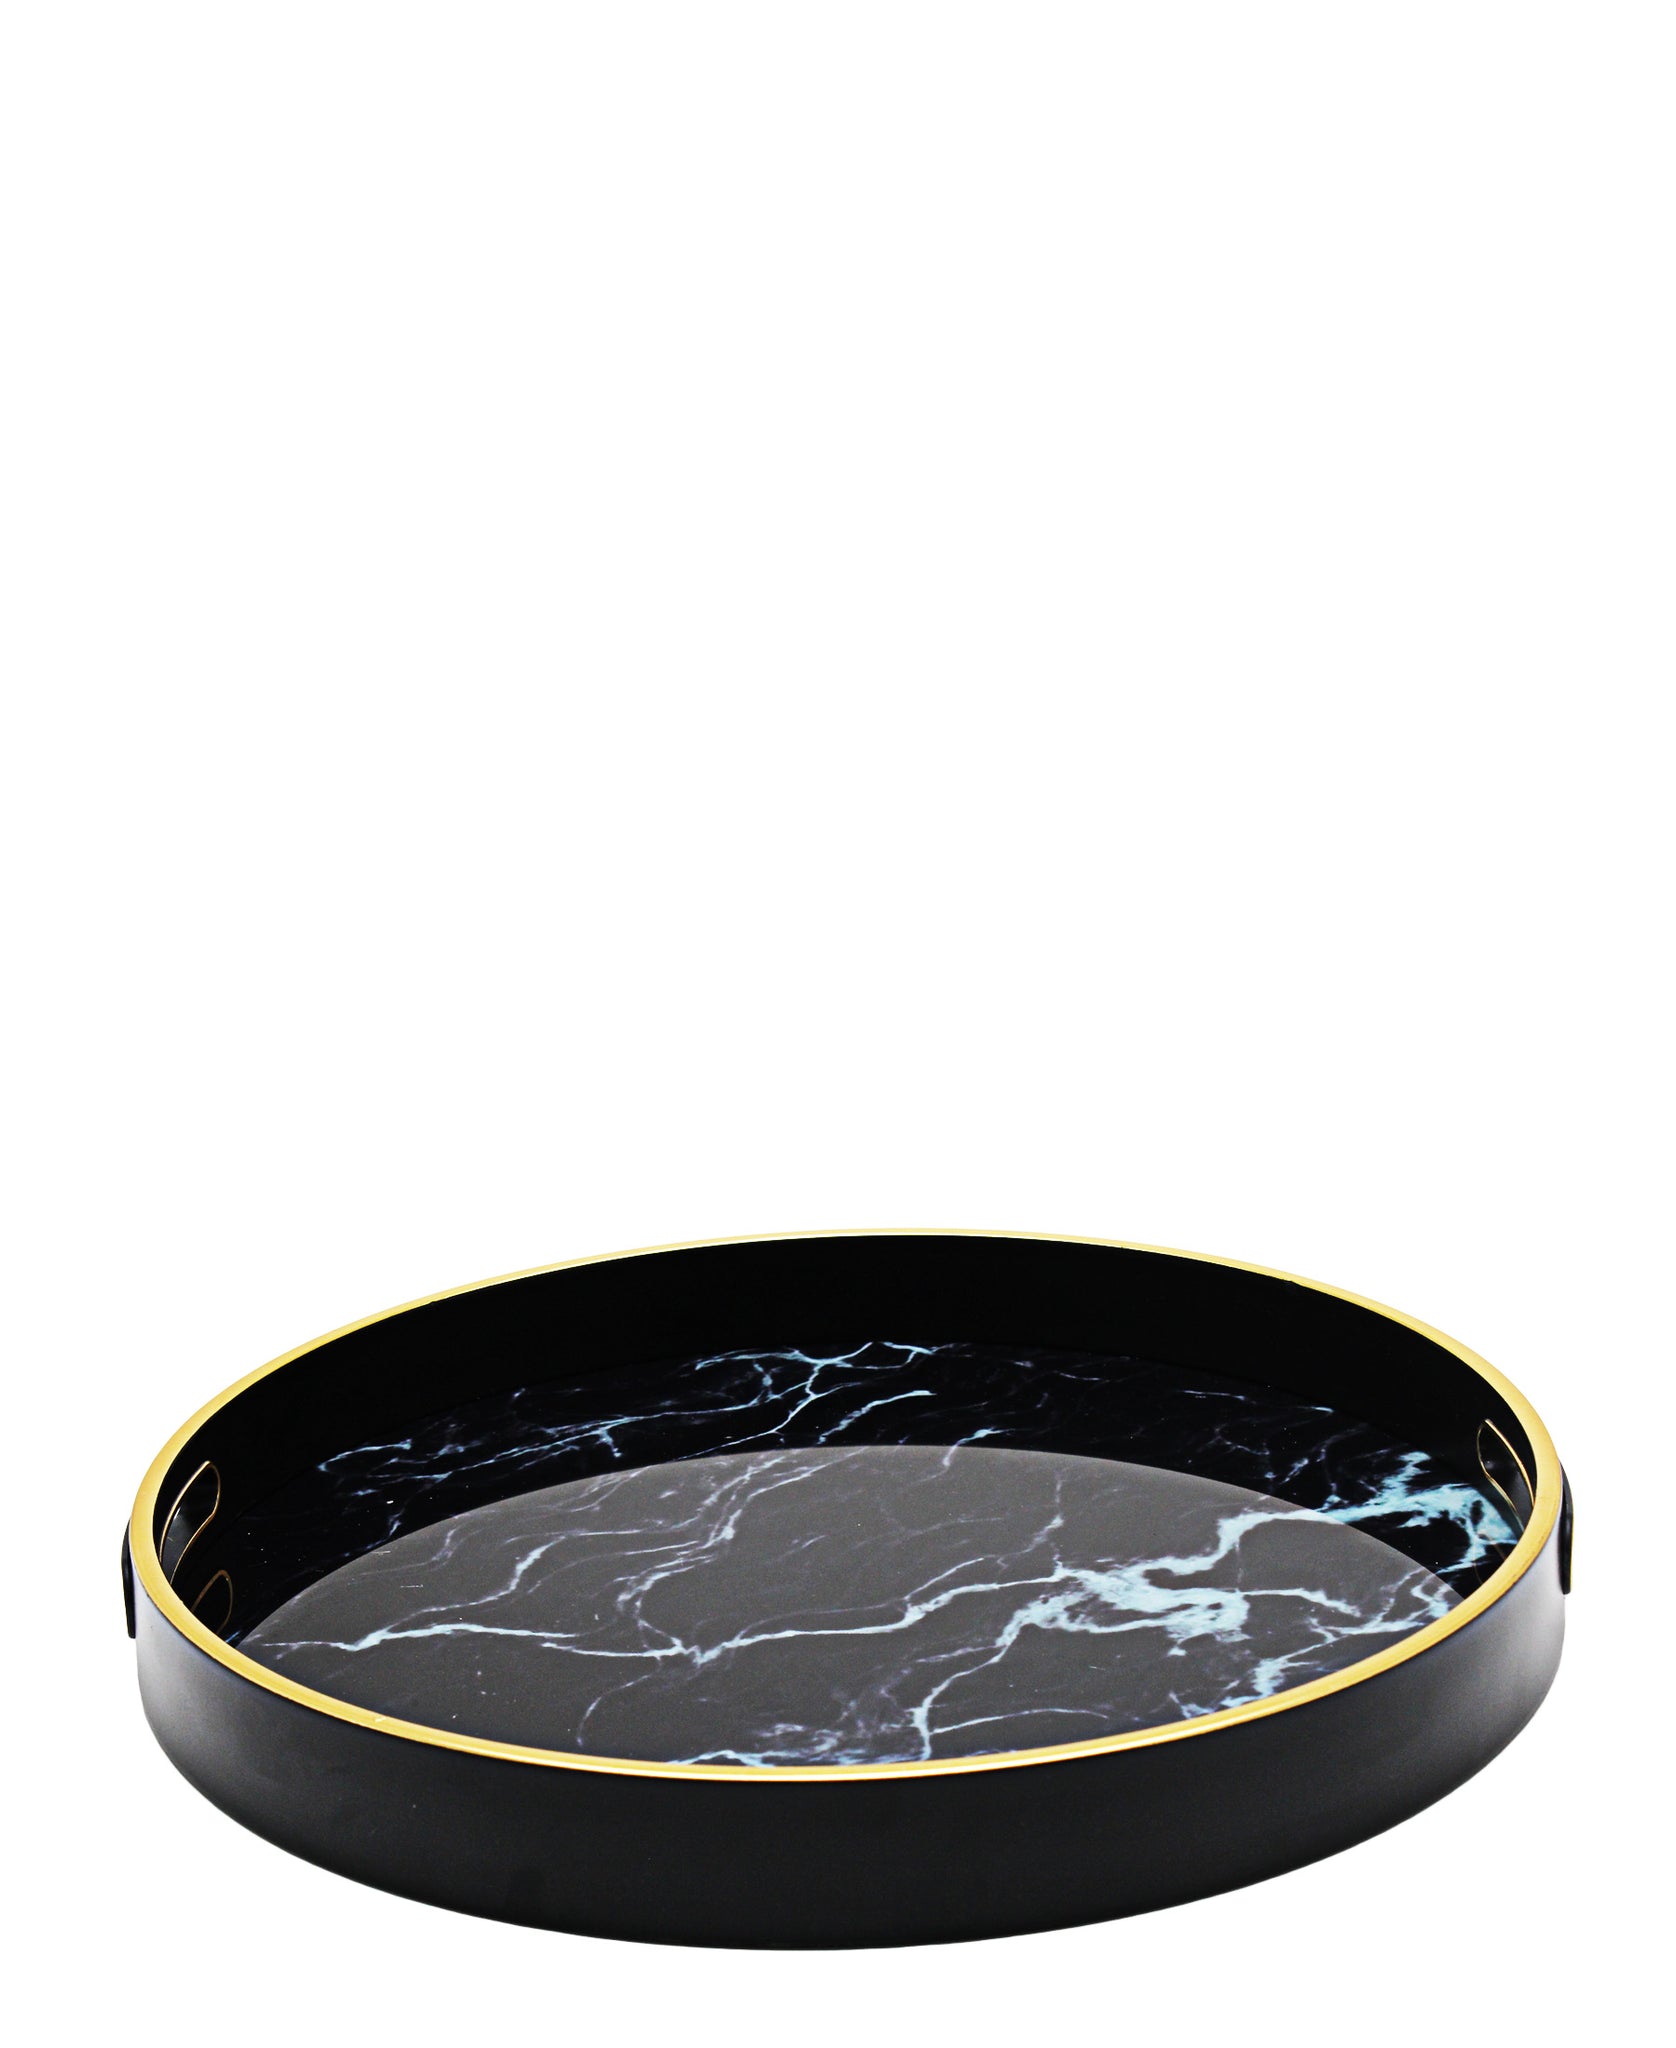 Urban Decor Glass 2 Piece Tray With Marble Finish - Black